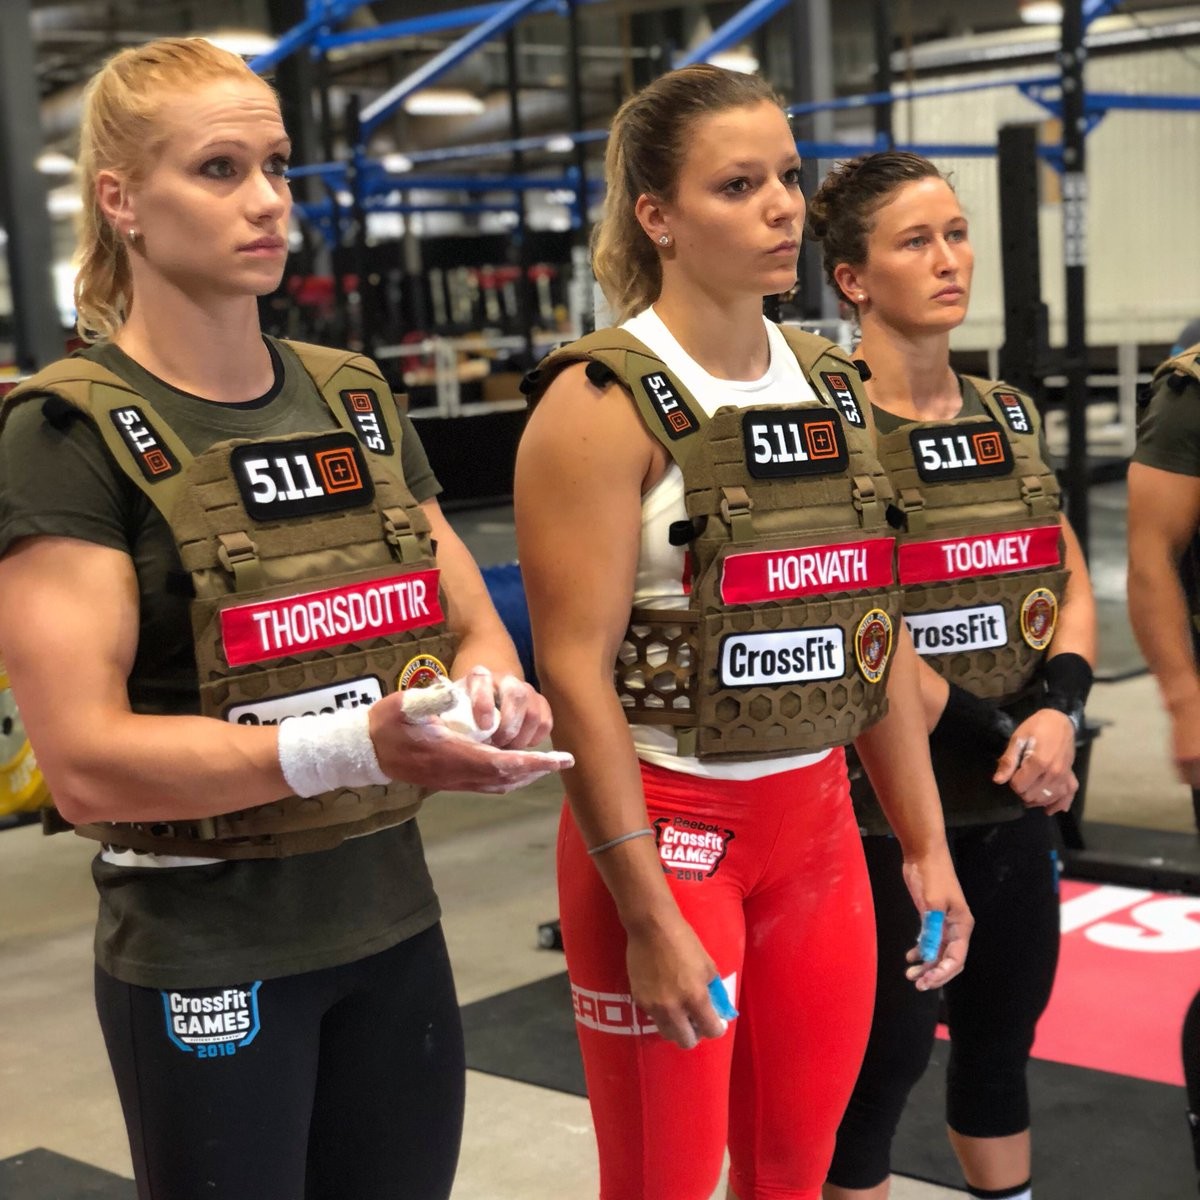 Laura Horvath has the Highest Score for CrossFit Games 2018